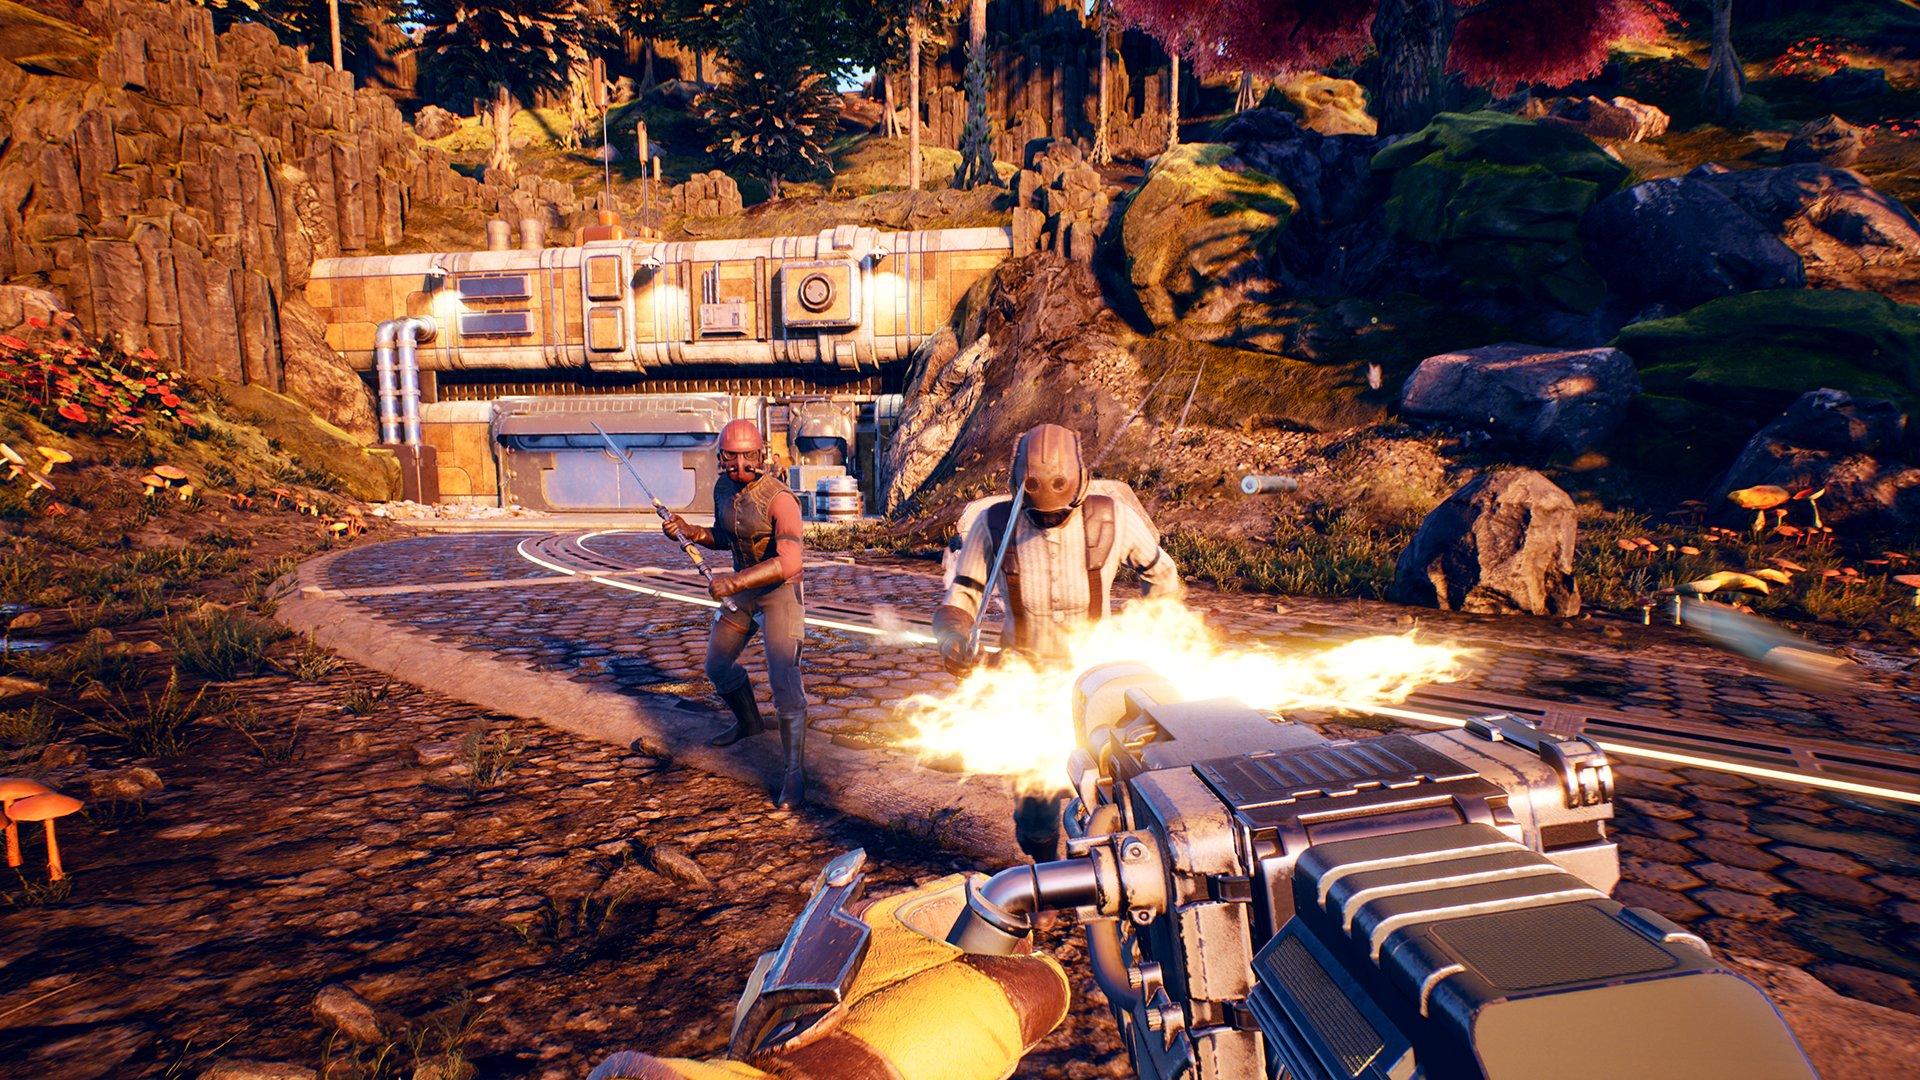 The Outer Worlds Xbox One Video Game By Take 2 Interactive Obsidian  710425595165